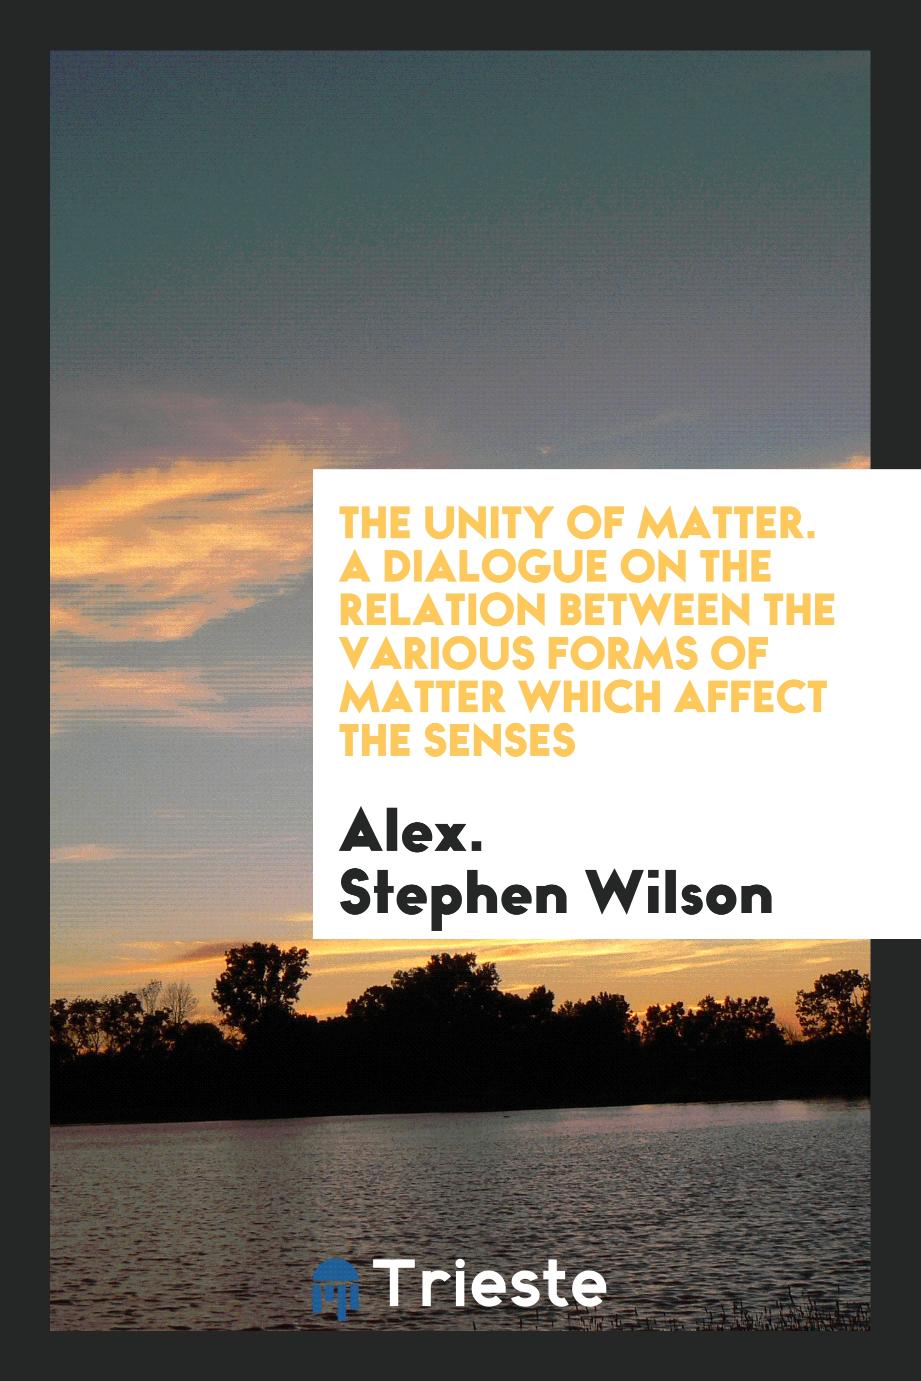 The unity of matter. A dialogue on the relation between the various forms of matter which affect the senses